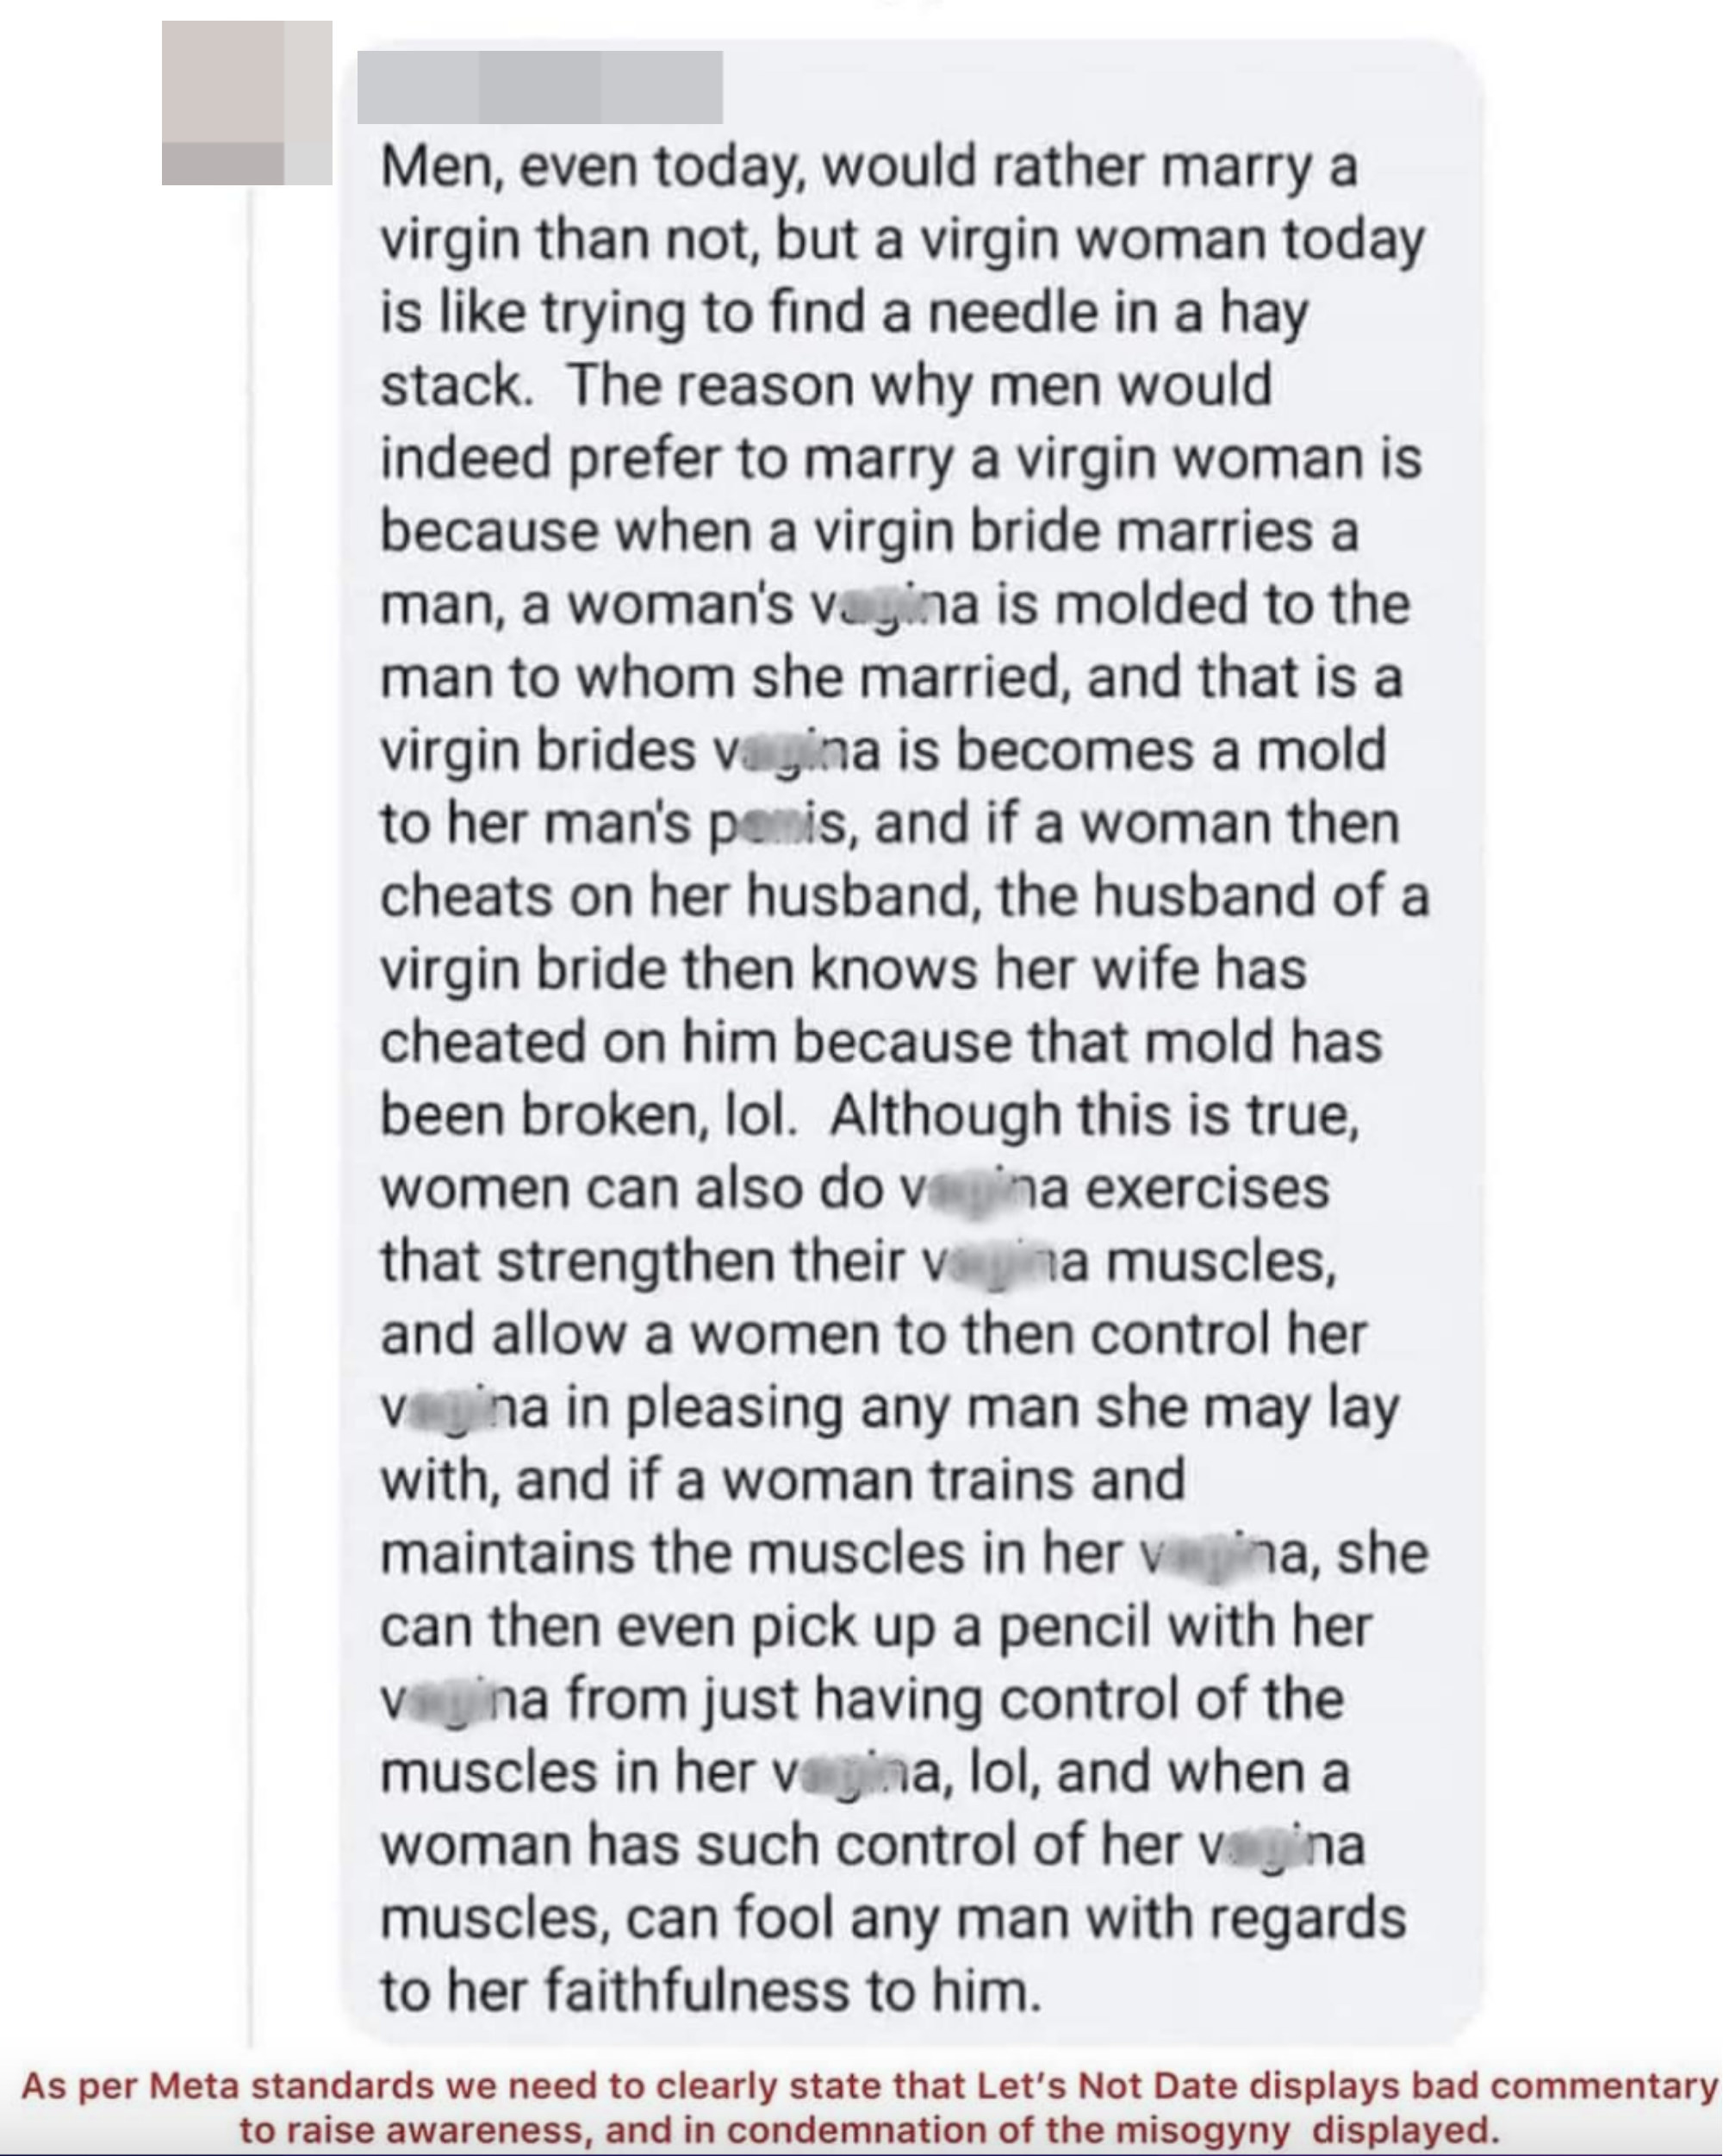 &quot;when a woman has such control of her vagina muscles, can fool any man with regards to her faithfulness to him.&quot;